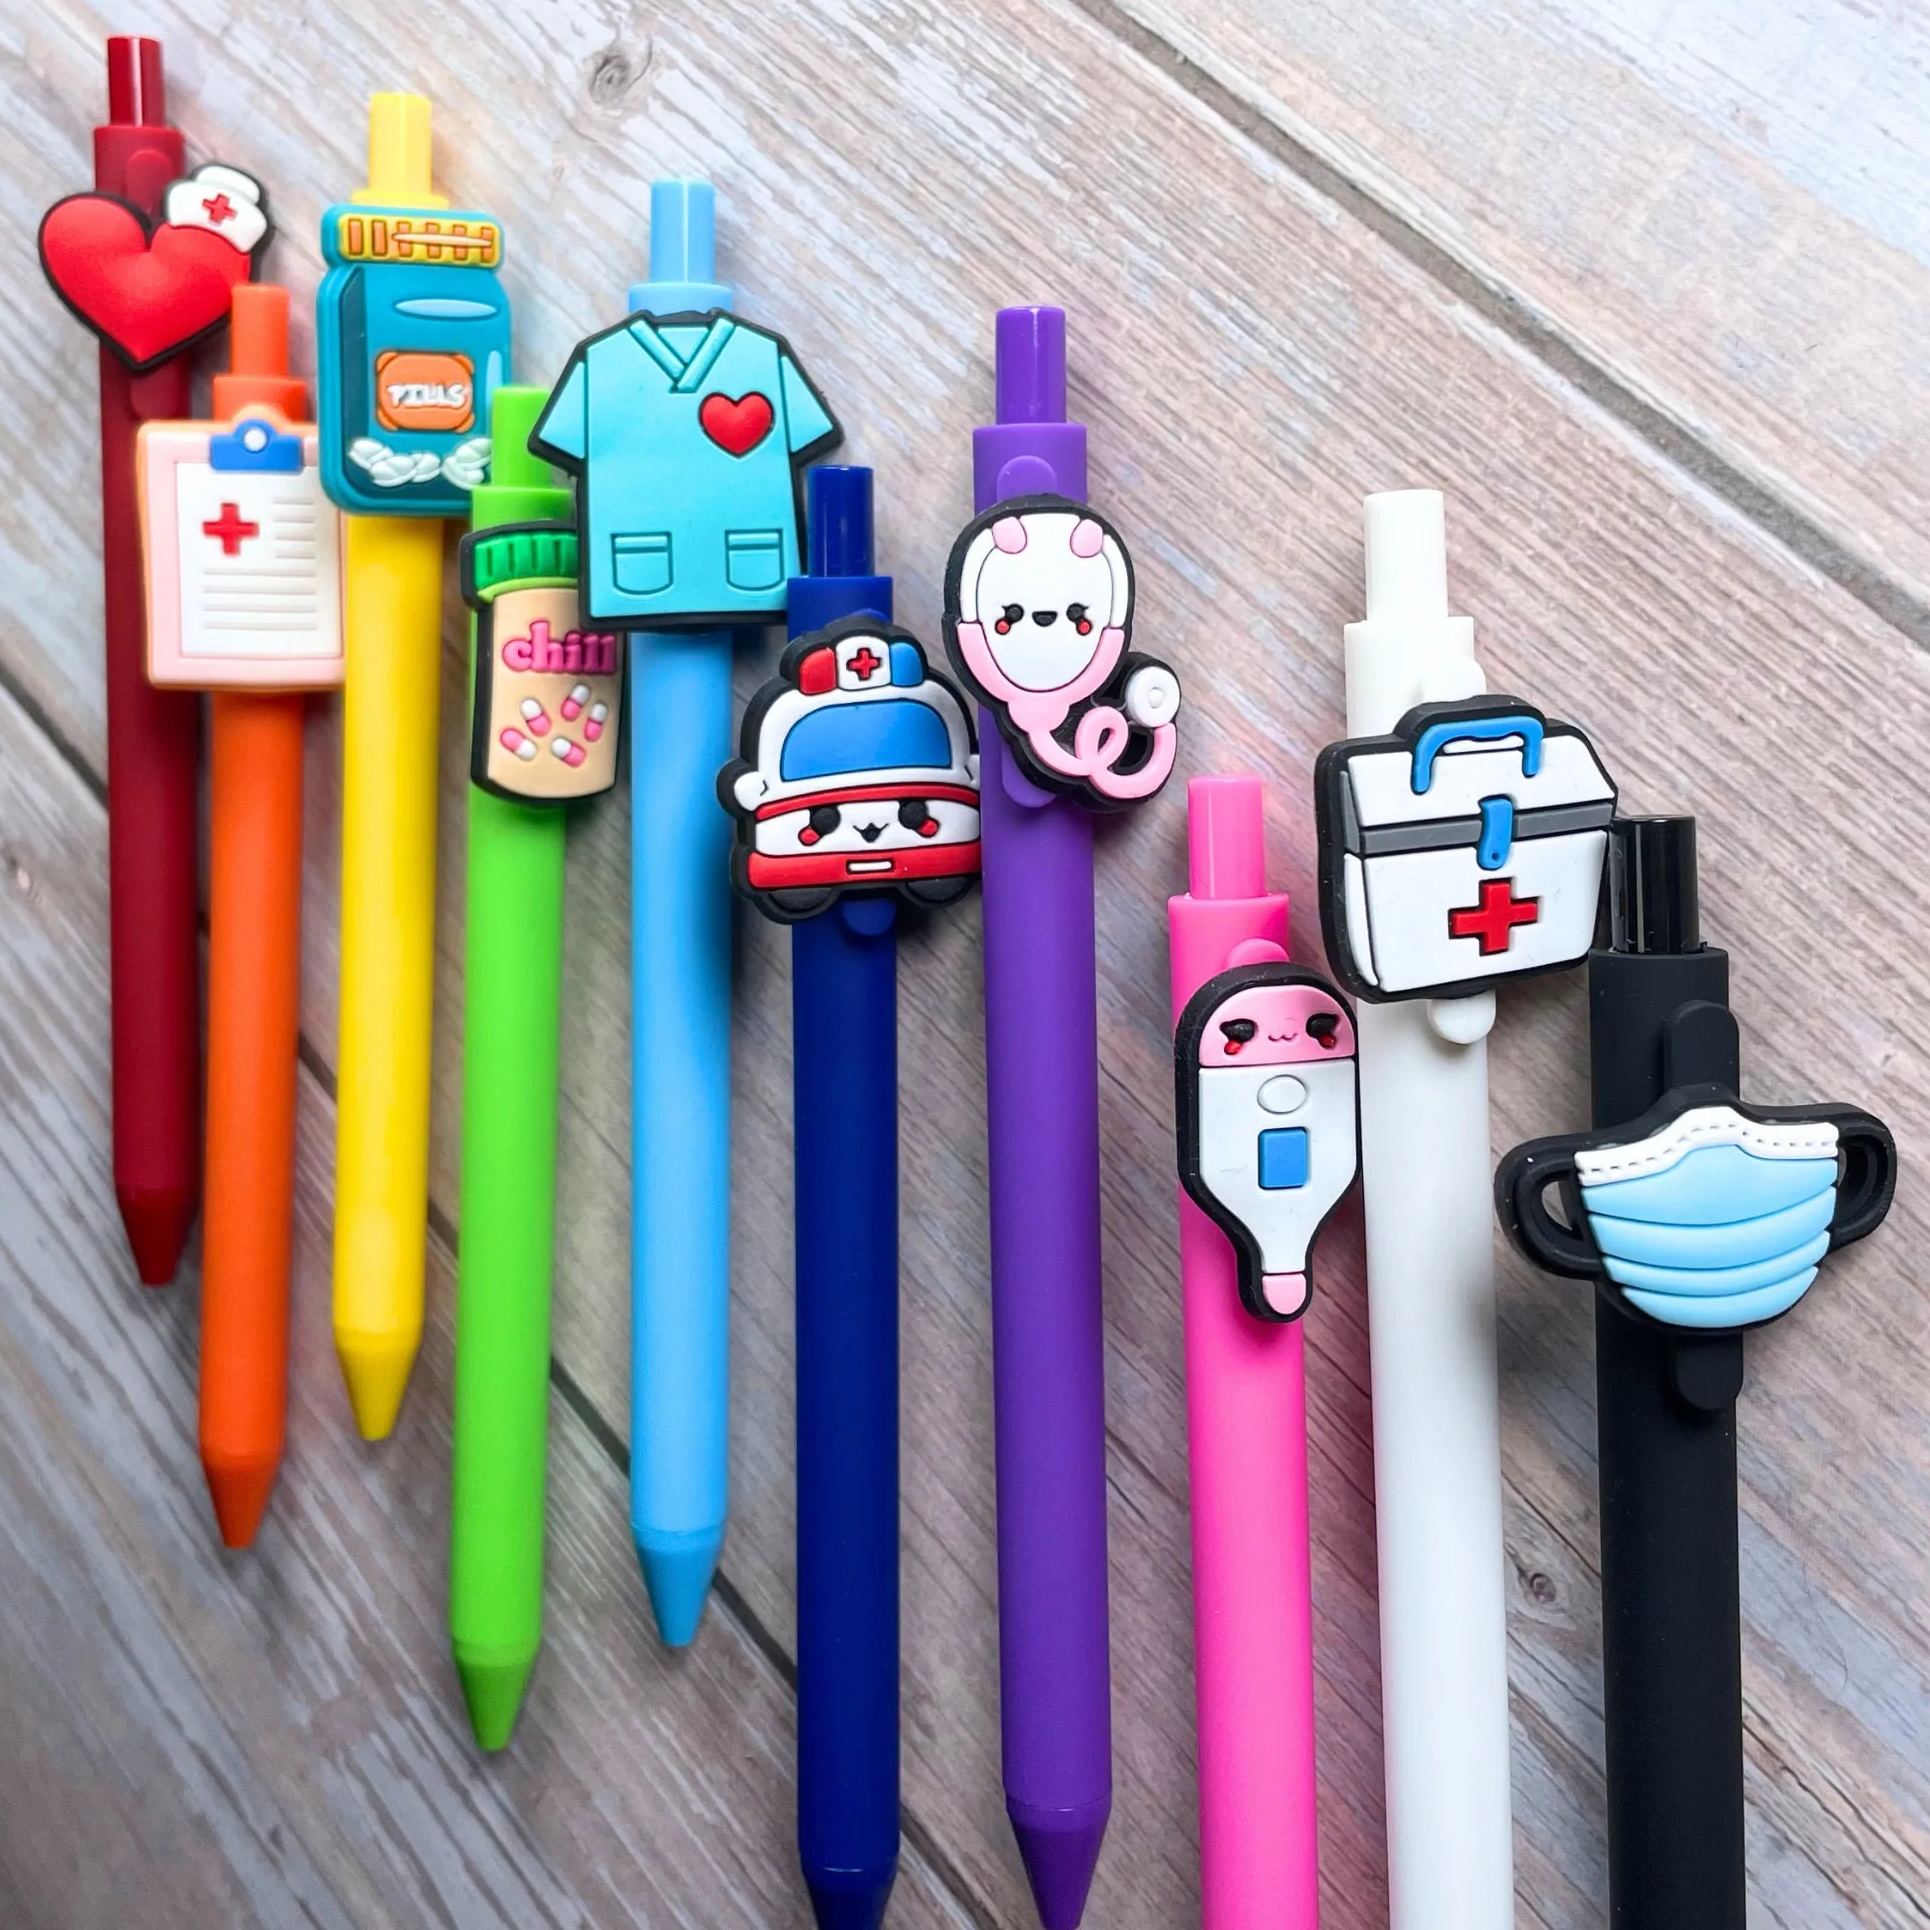 10 PC Cute Nursing Pens Set in Bulk with Heart and Syringe